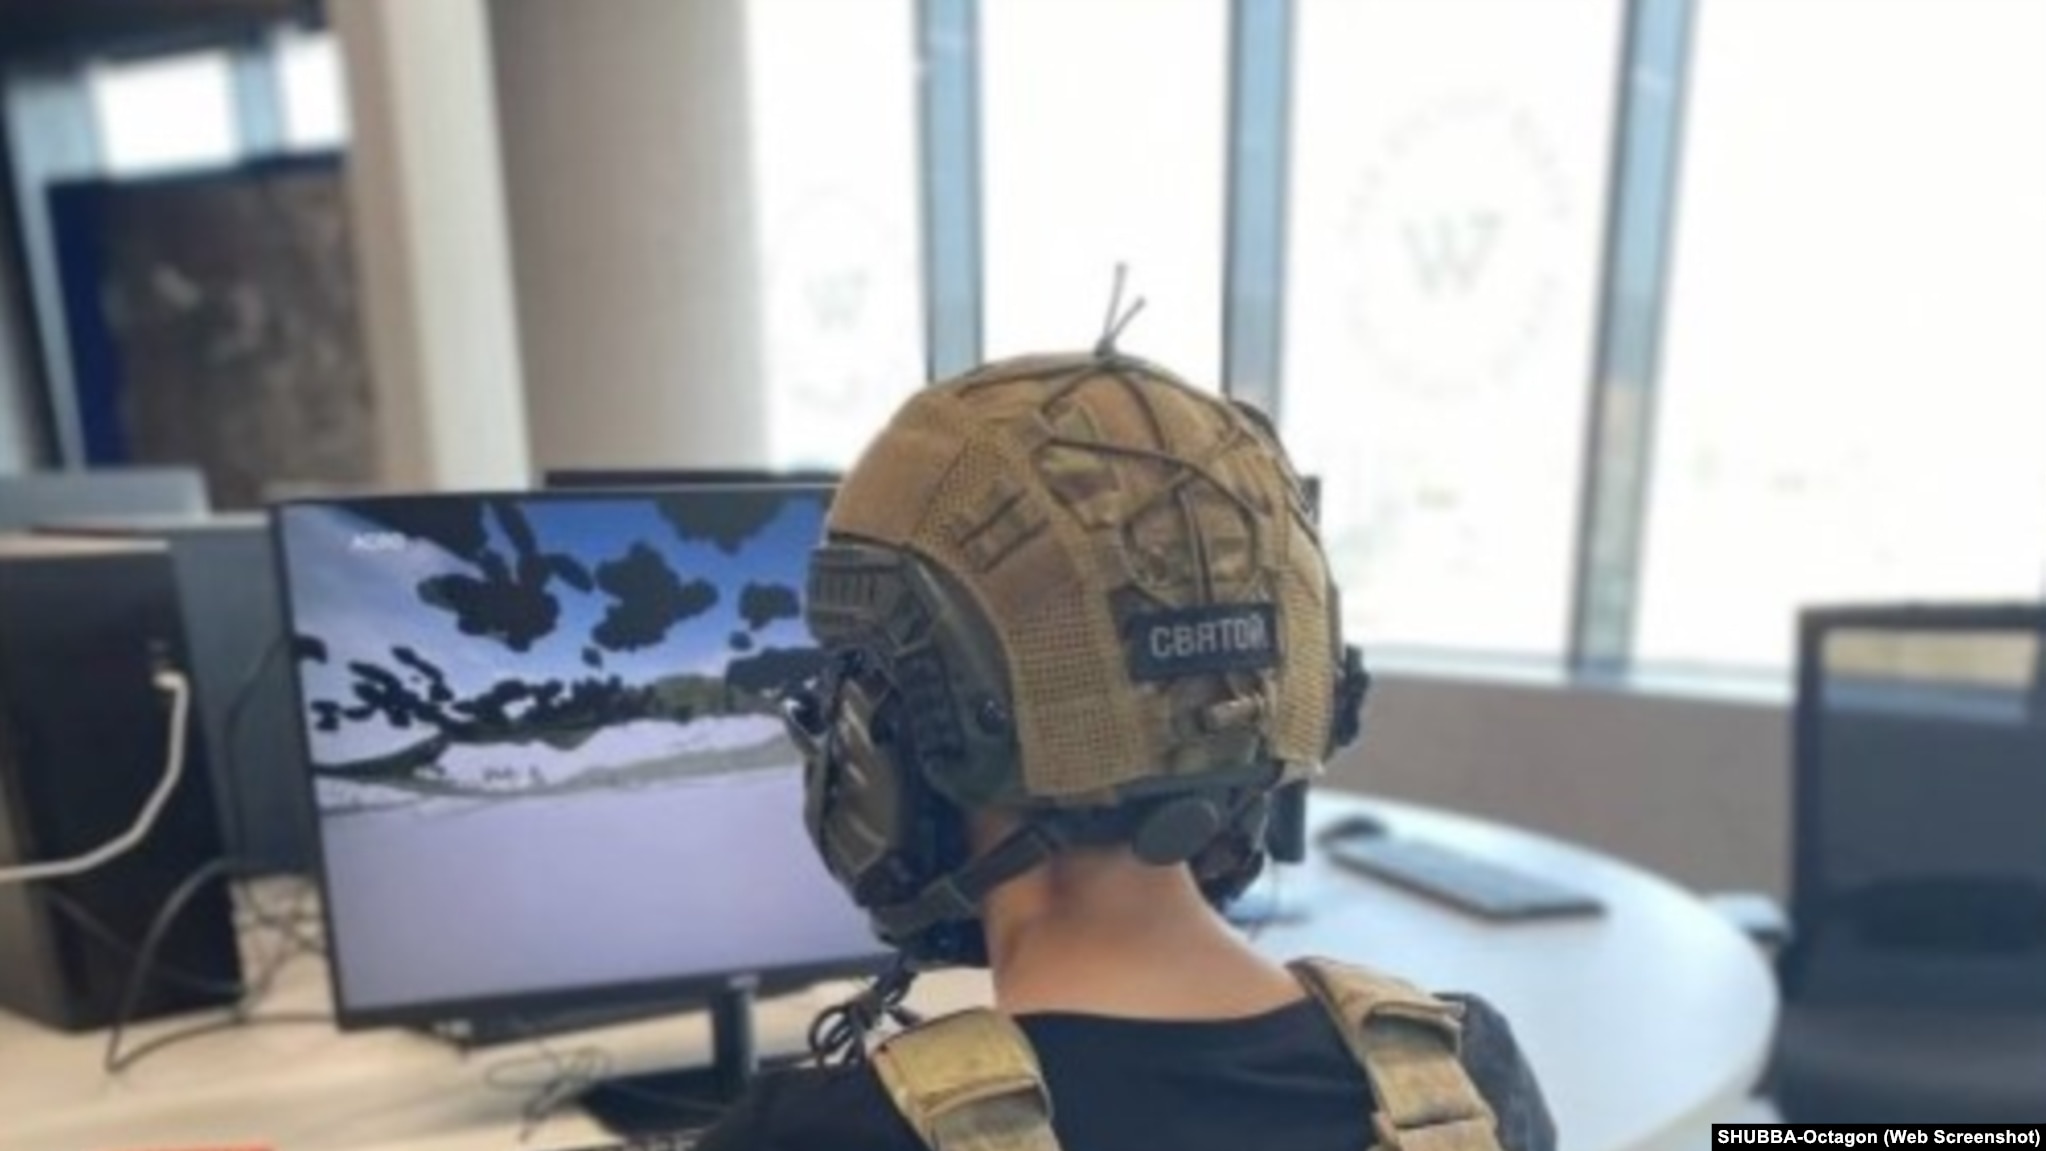 A photo from the Octagon drone pilot school’s website showing a person in military uniform.